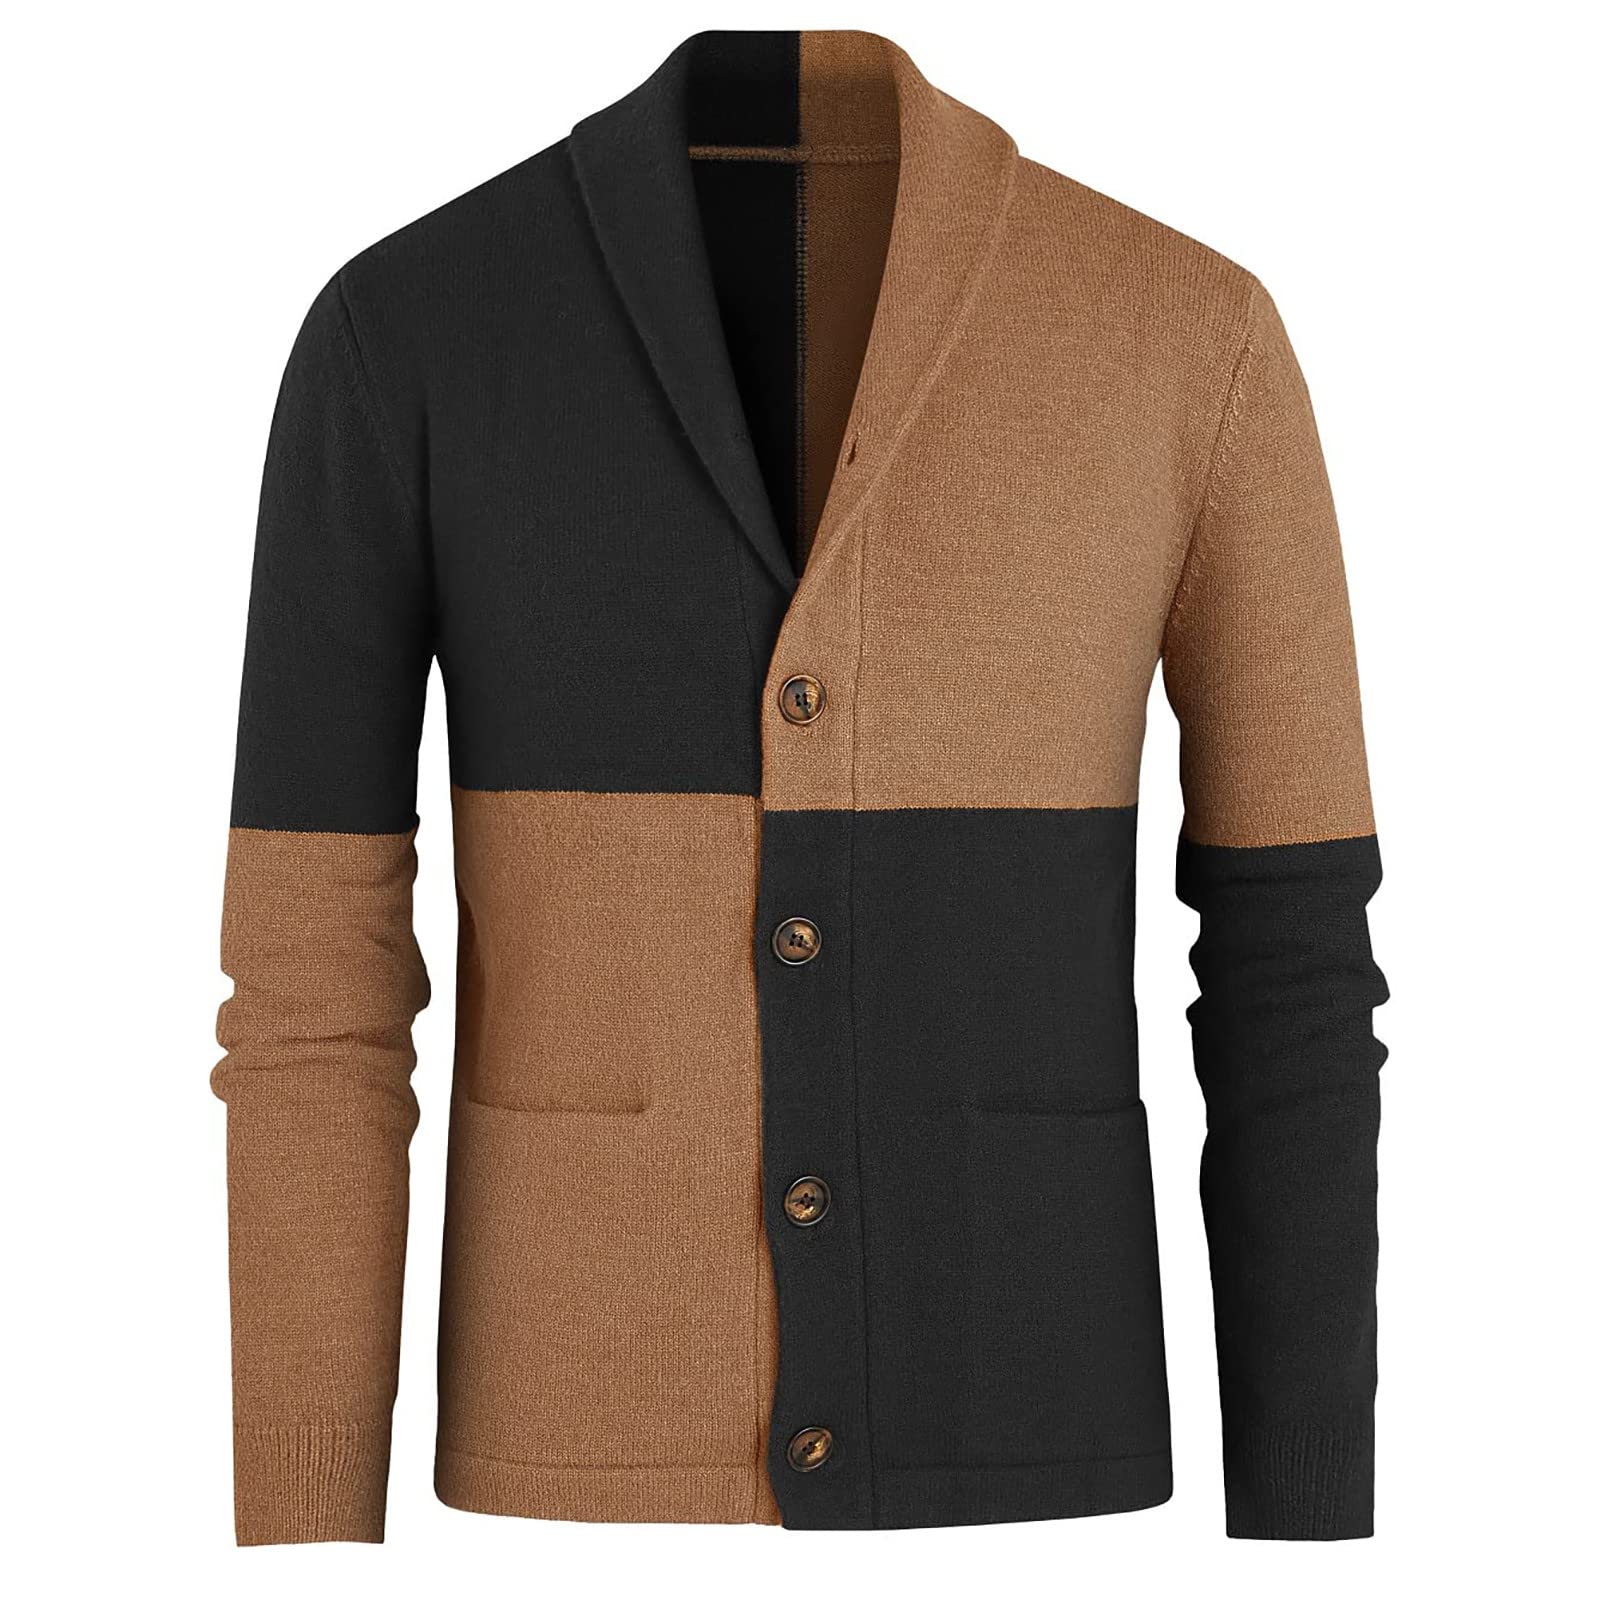 Color Block Cardigan Men Shawl Collar Cardigan Sweaters Regular Fit Knit Button Down Sweater Cardigans With Pocket